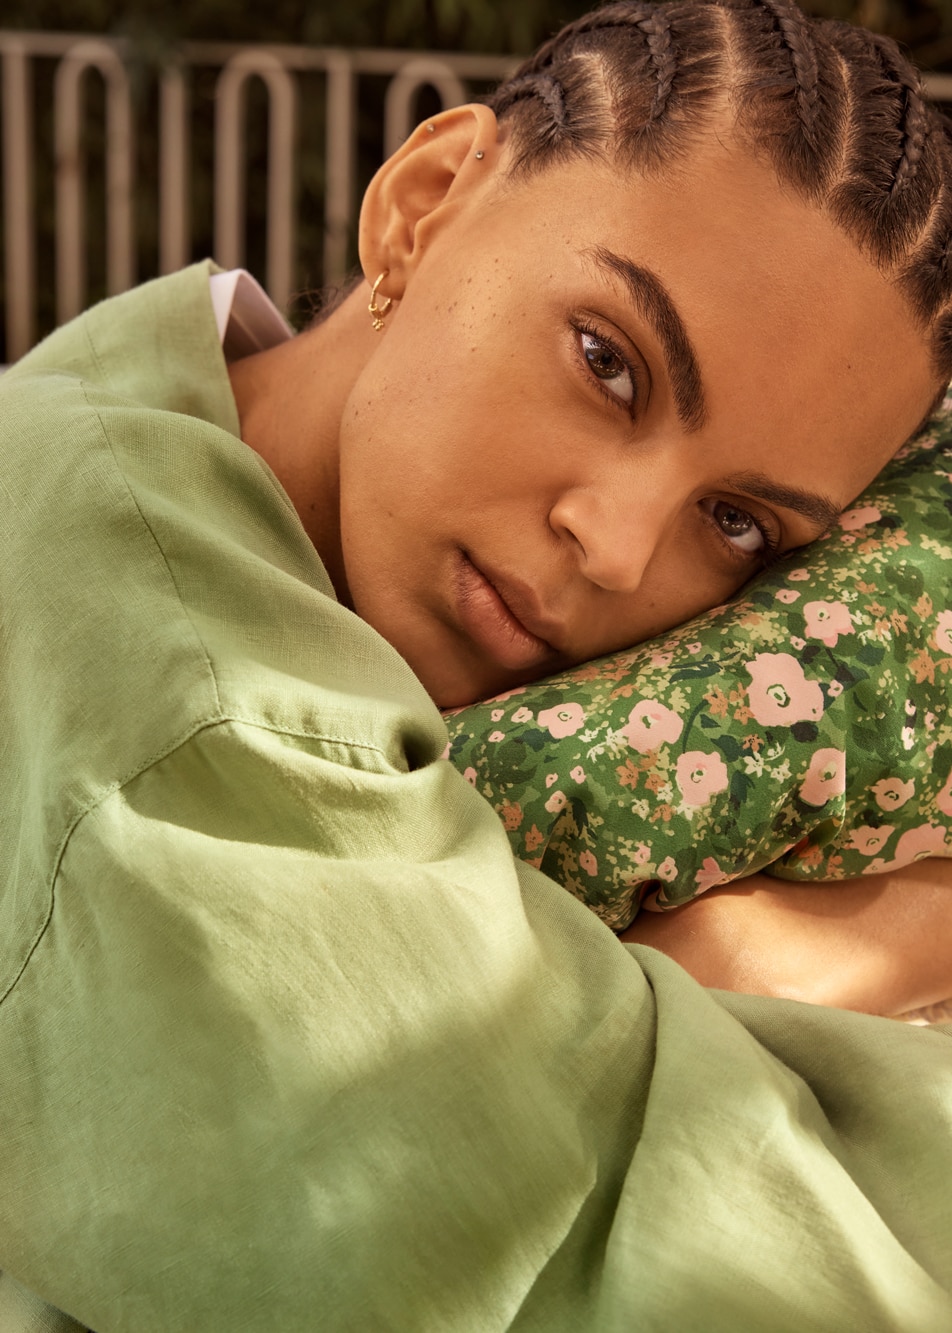 A young person with braids wearing a green linen robe, resting their face on a floral print quilt